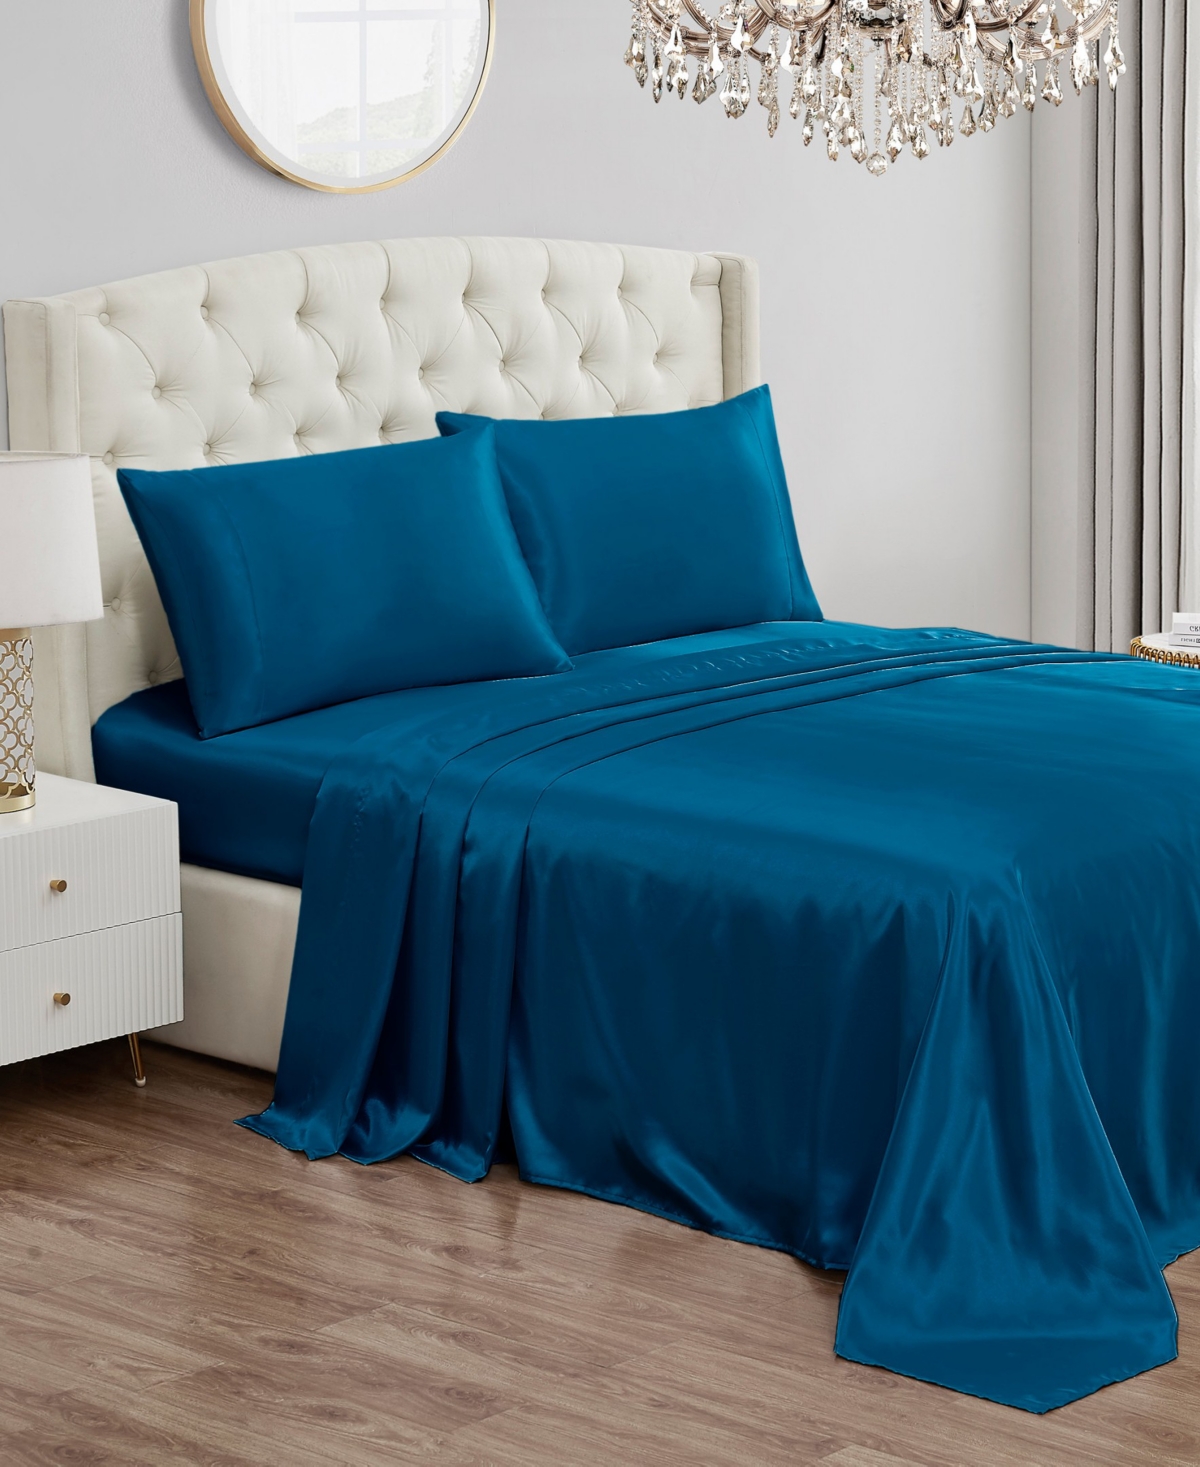 Juicy Couture Satin 4 Piece Sheet Set, Full In Blue